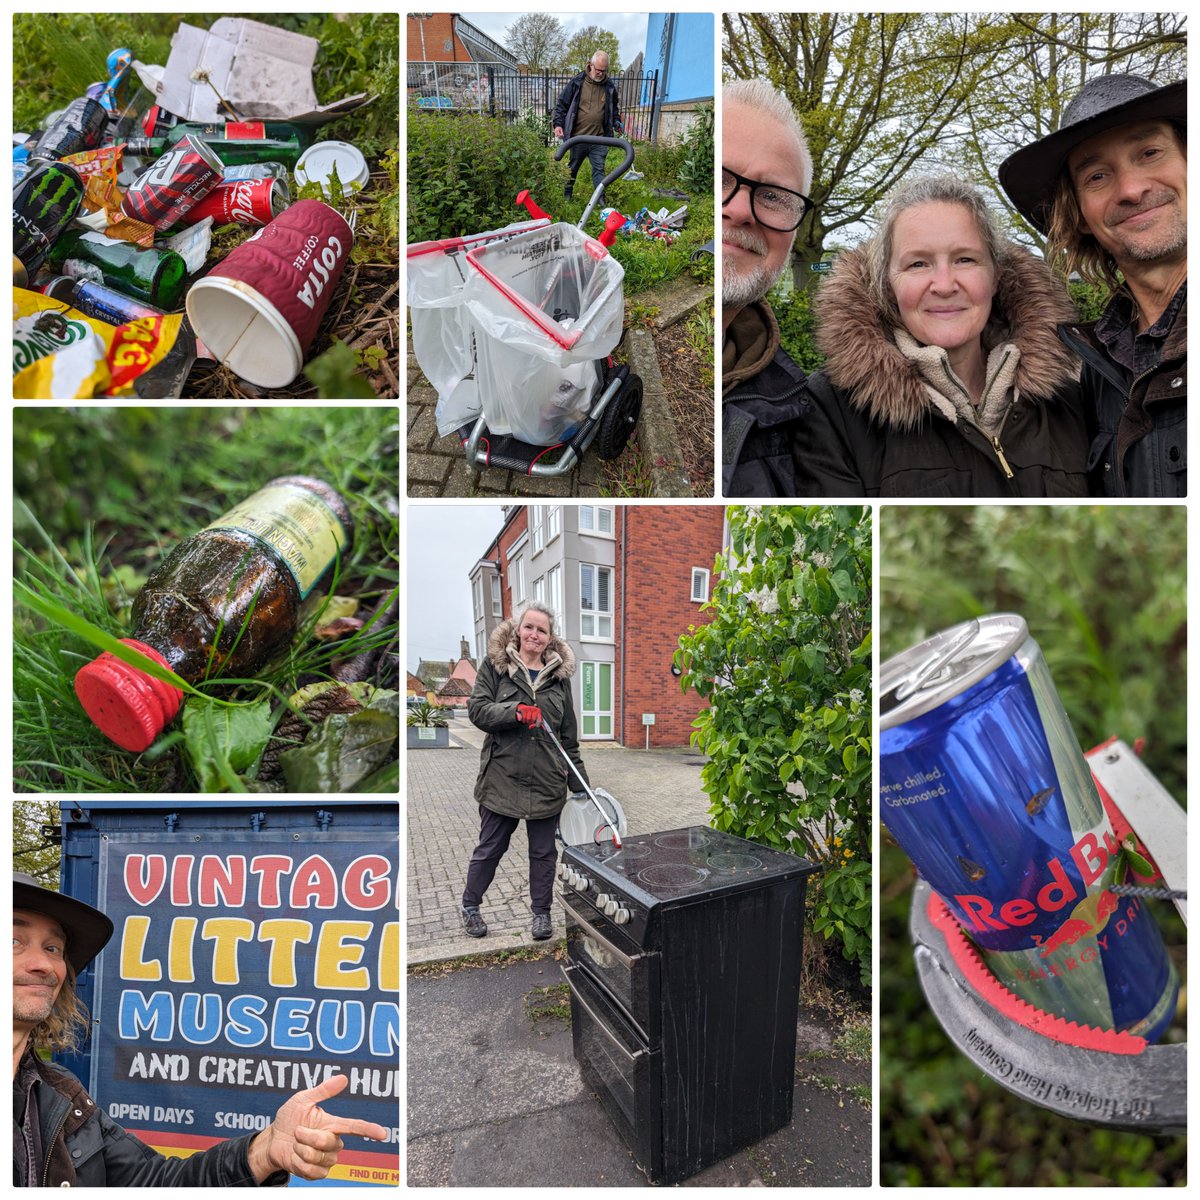 Another litter pick with @UKrubbishwalks thanks to all those who turned up to help, enthusiastic as ever, despite the slightly damp morning 😍 Some of the more unusual things we found were a fridge and an oven!!! #Litter #LitterPick #Rubbish